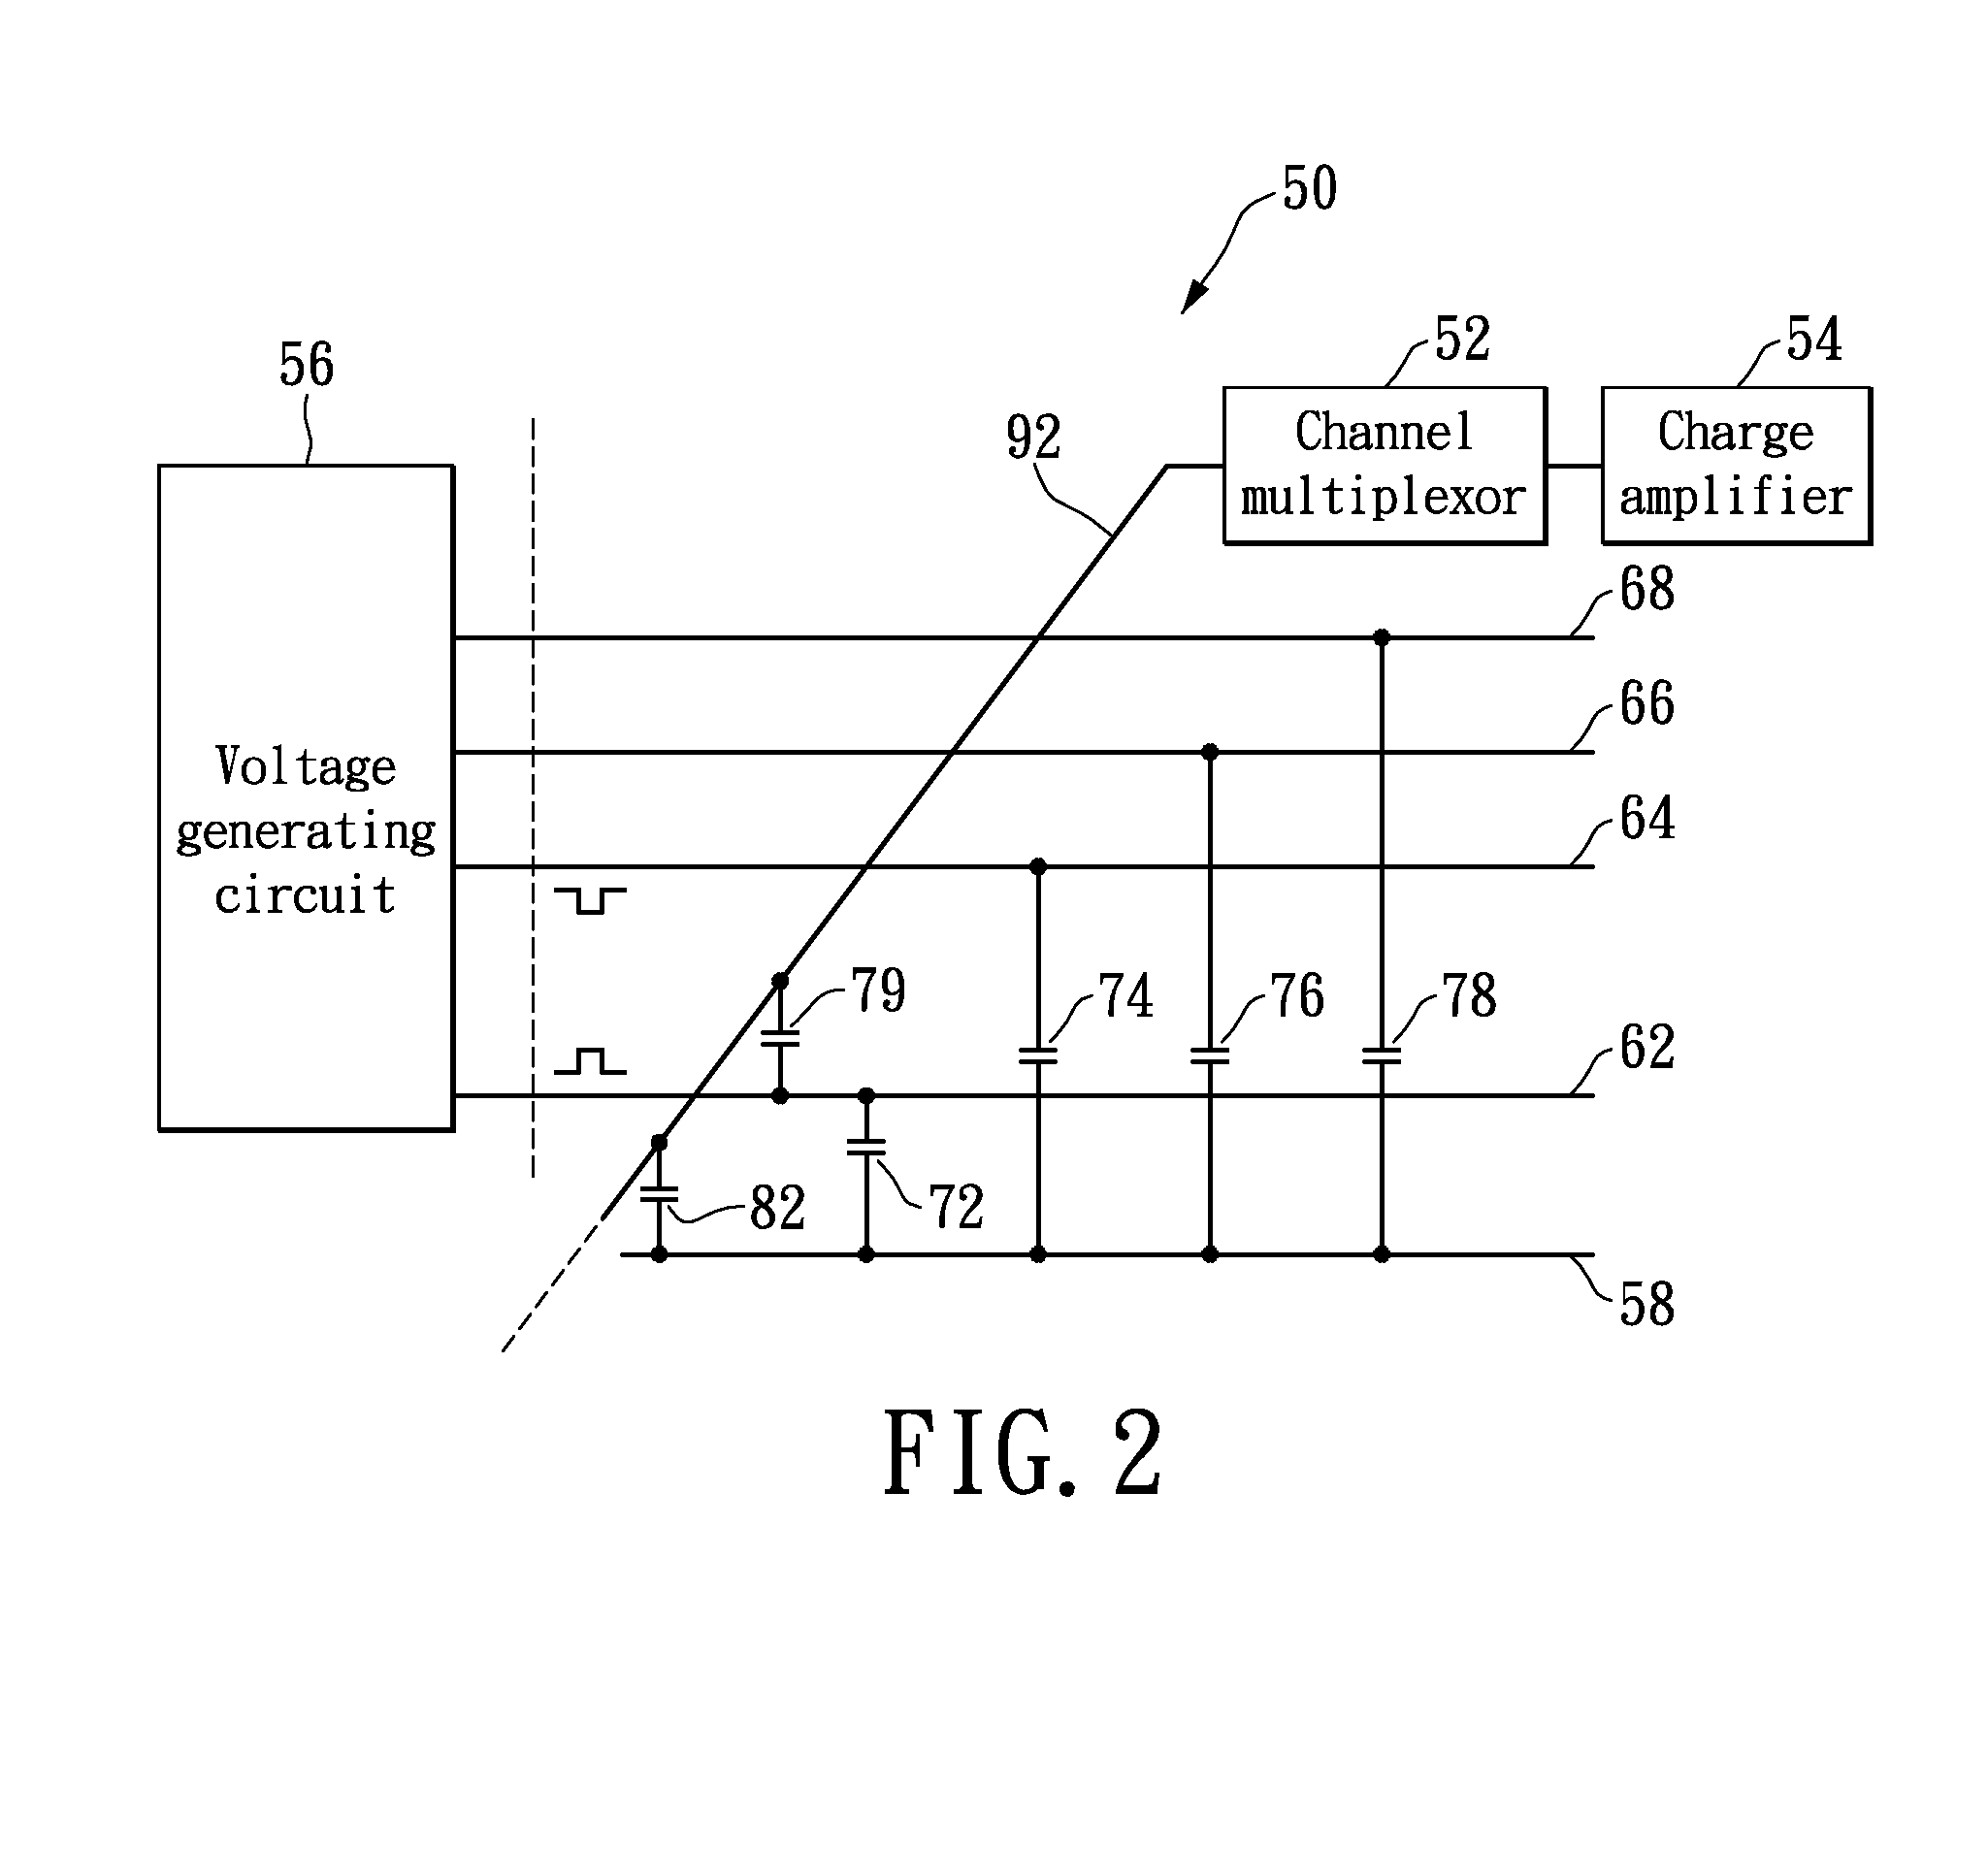 Method of minimizing charges accumulated at common electrode of display panel